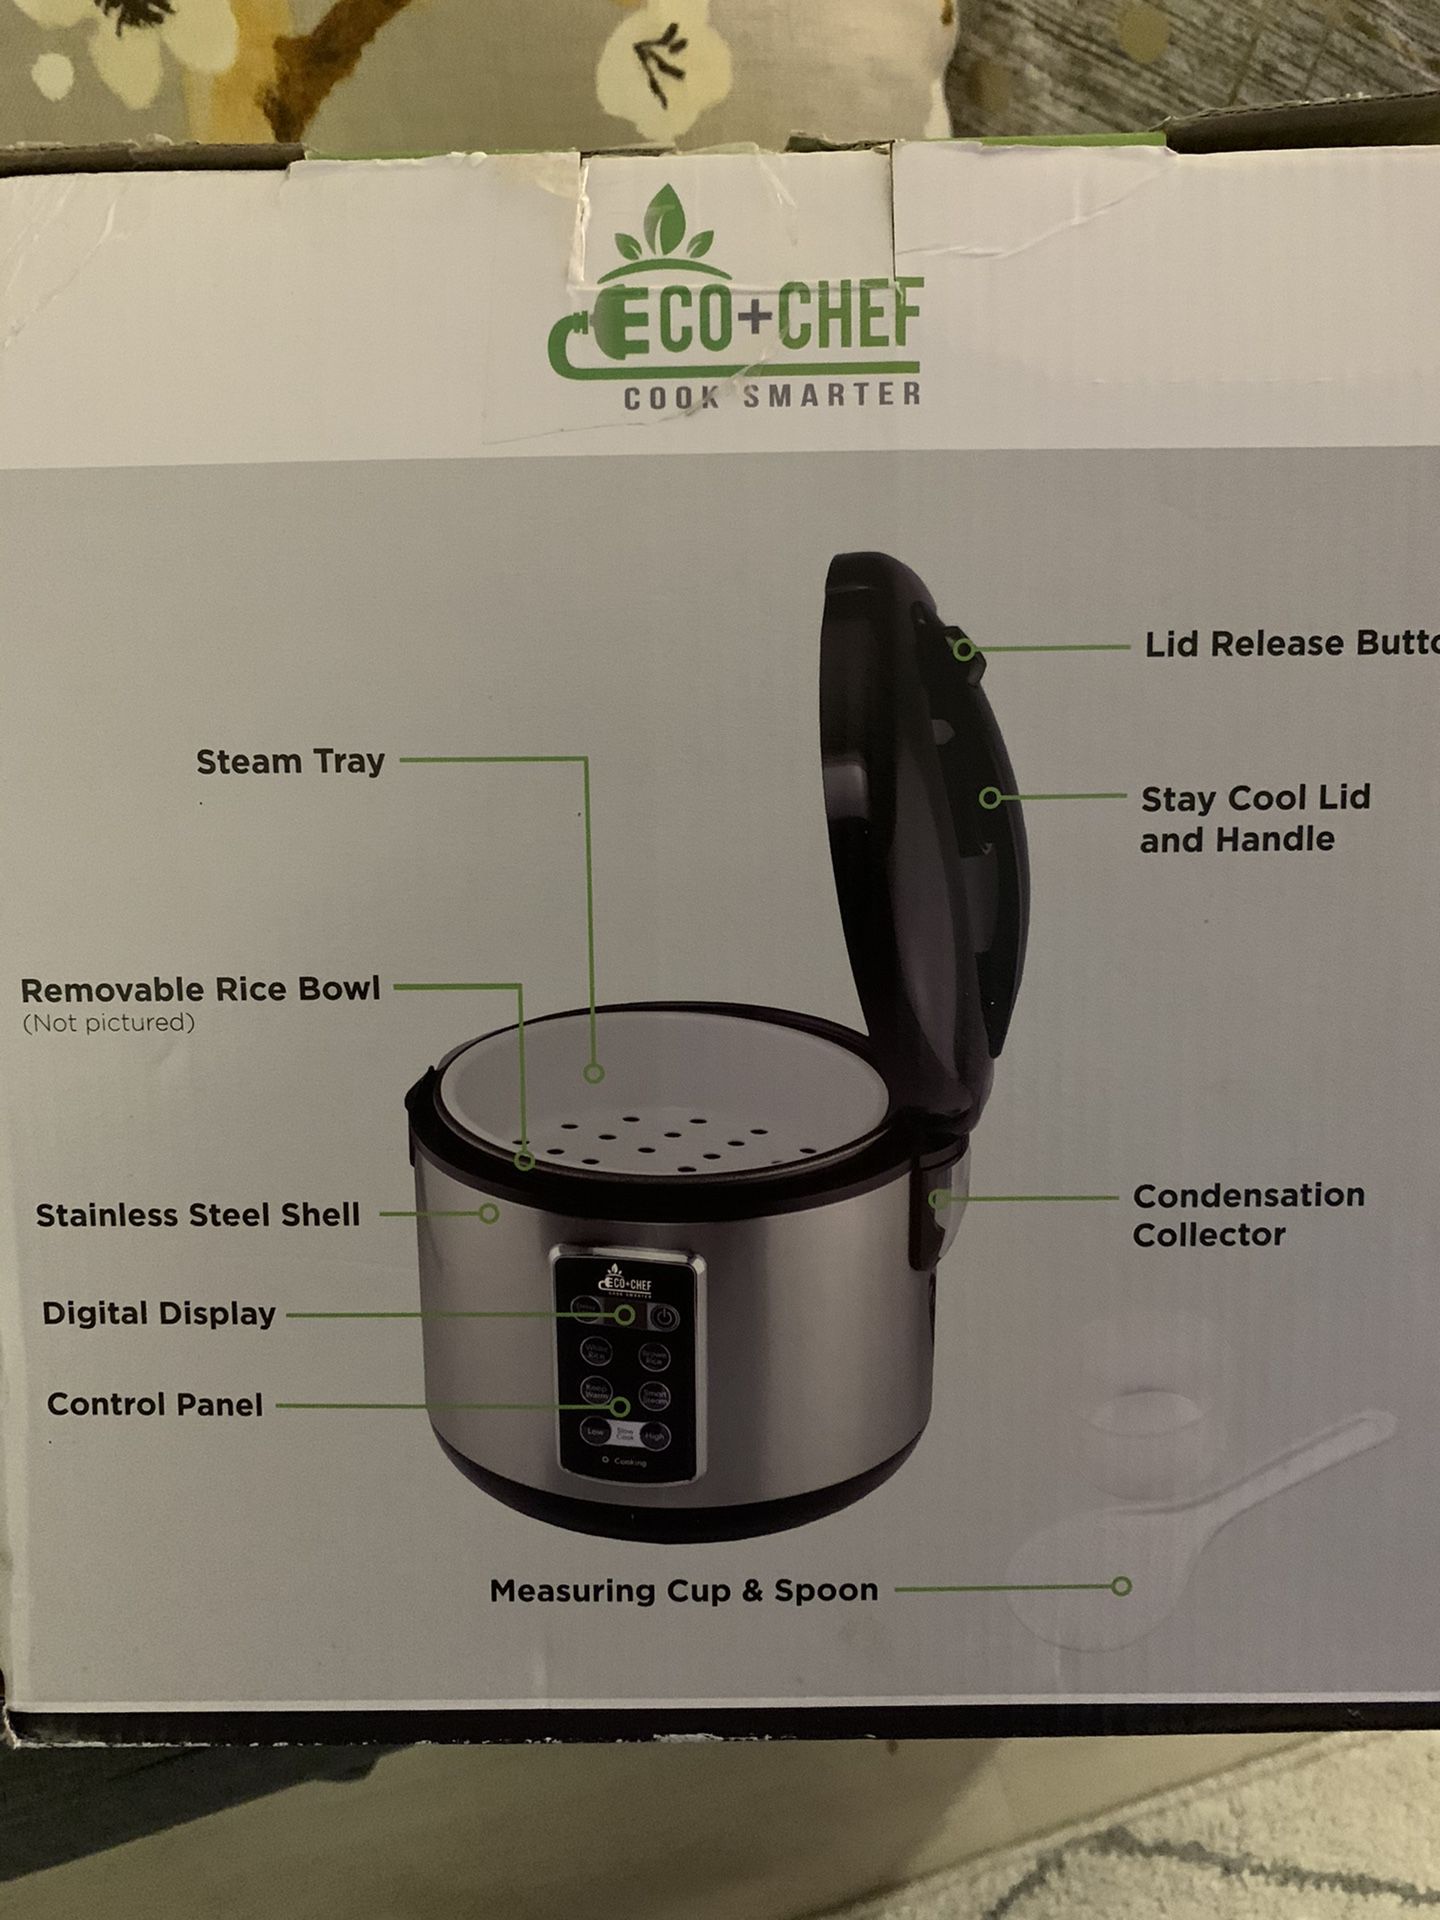 Buffalo Classic Rice Cooker [ BRAND NEW ] for Sale in San Francisco, CA -  OfferUp